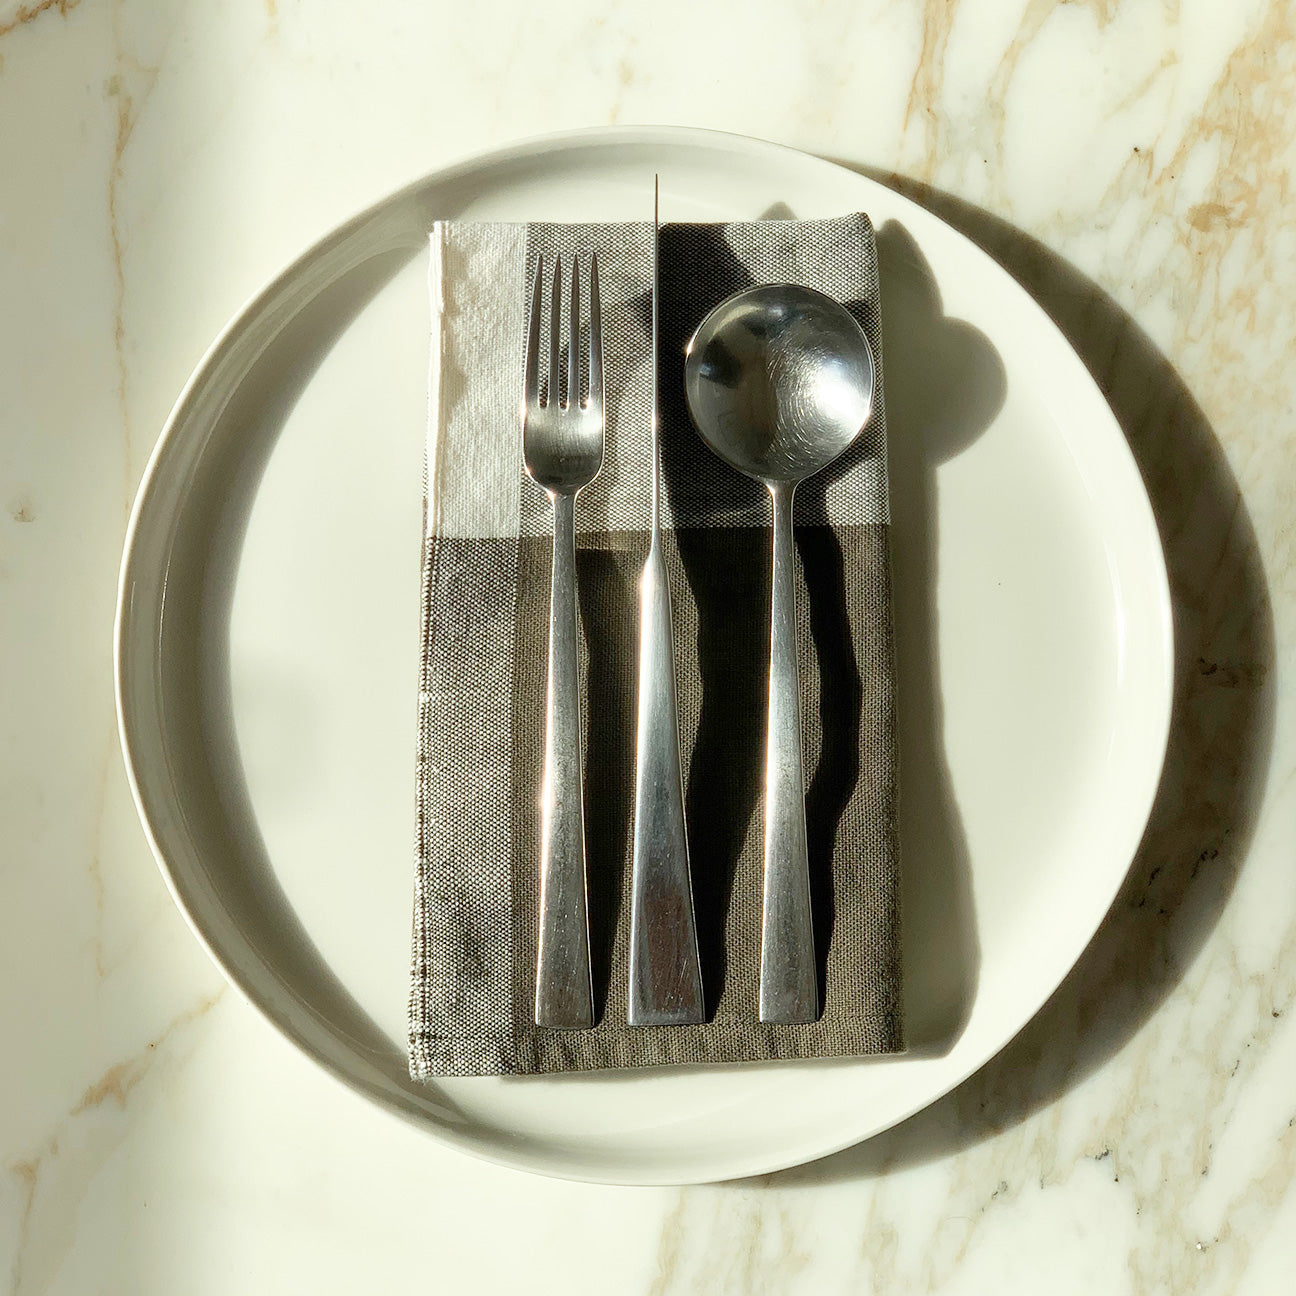 Image of M+A NYC Colorblock Napkin in Mineral/Kora folded on a cream plate with a set of flatware placed on top.